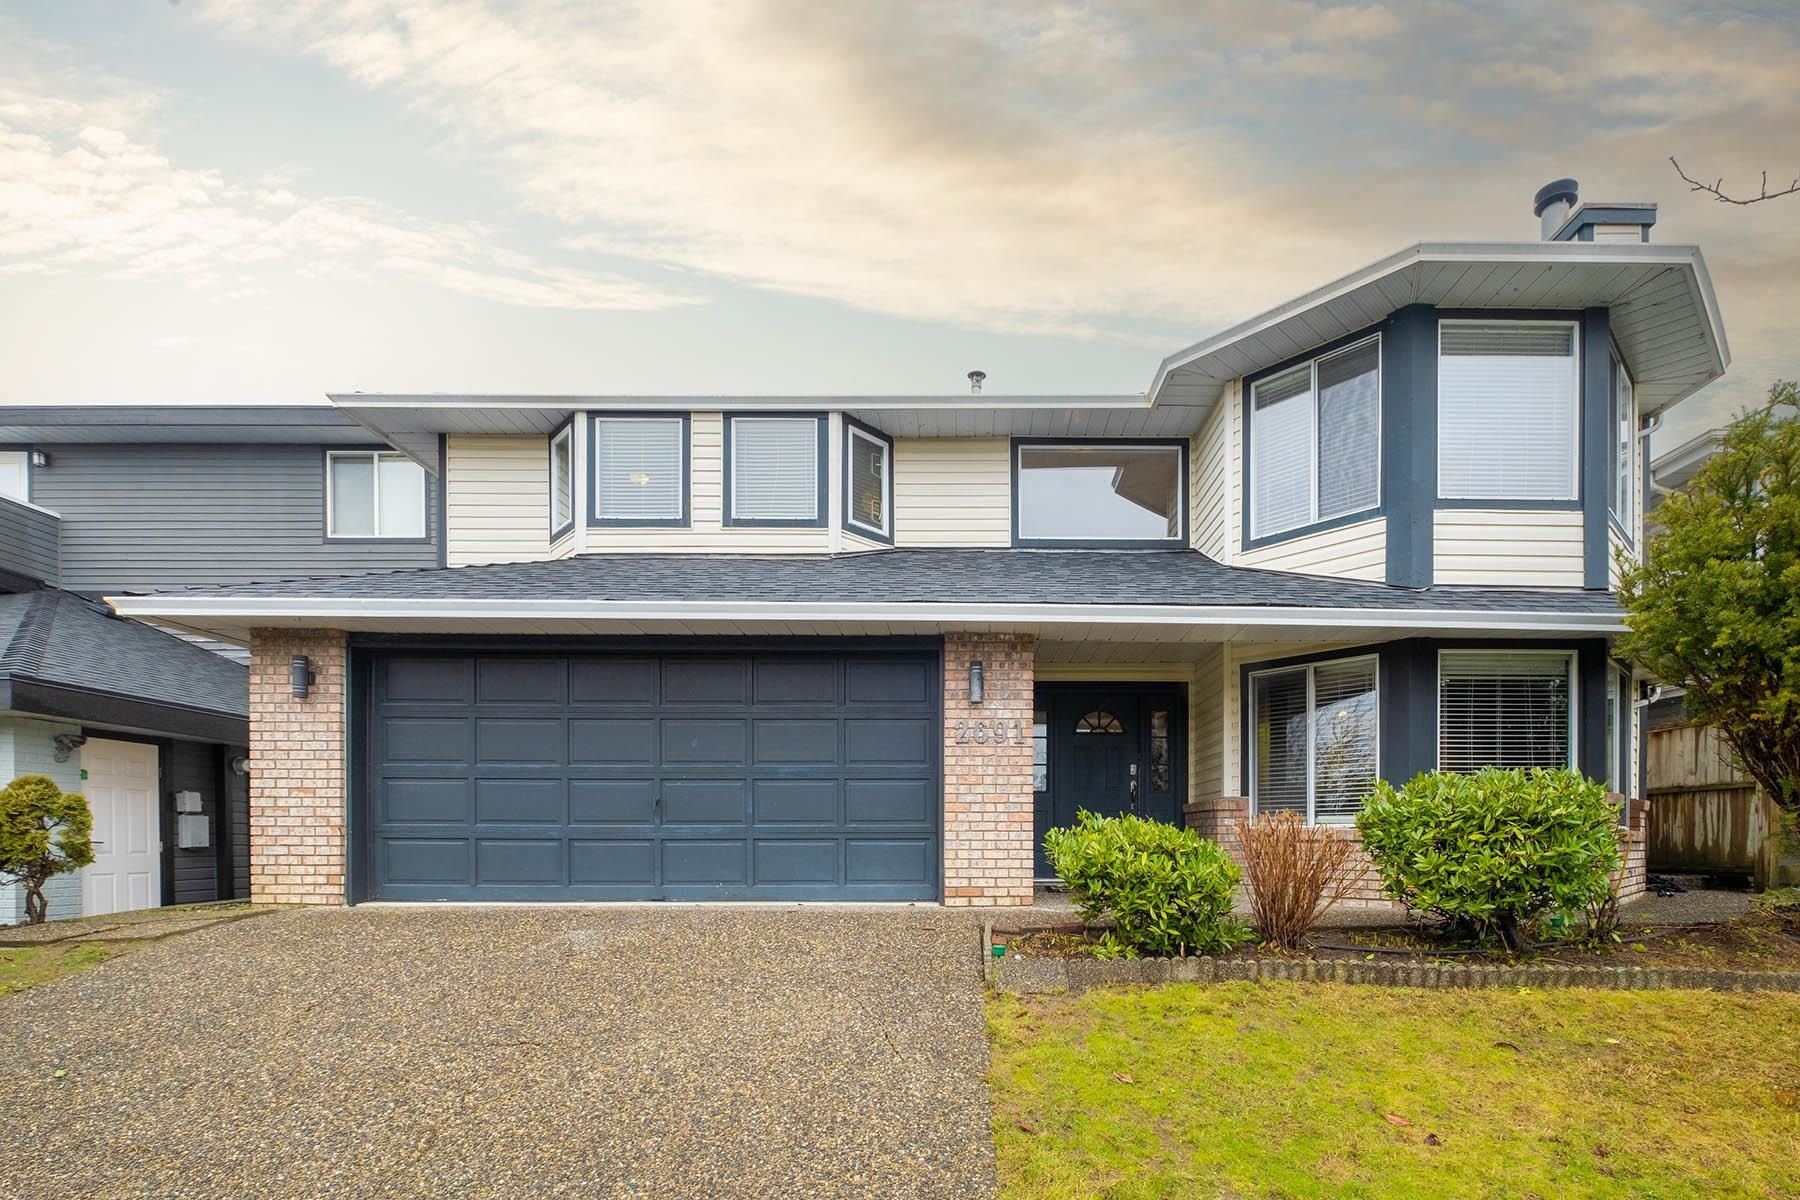 New property listed in Citadel PQ, Port Coquitlam